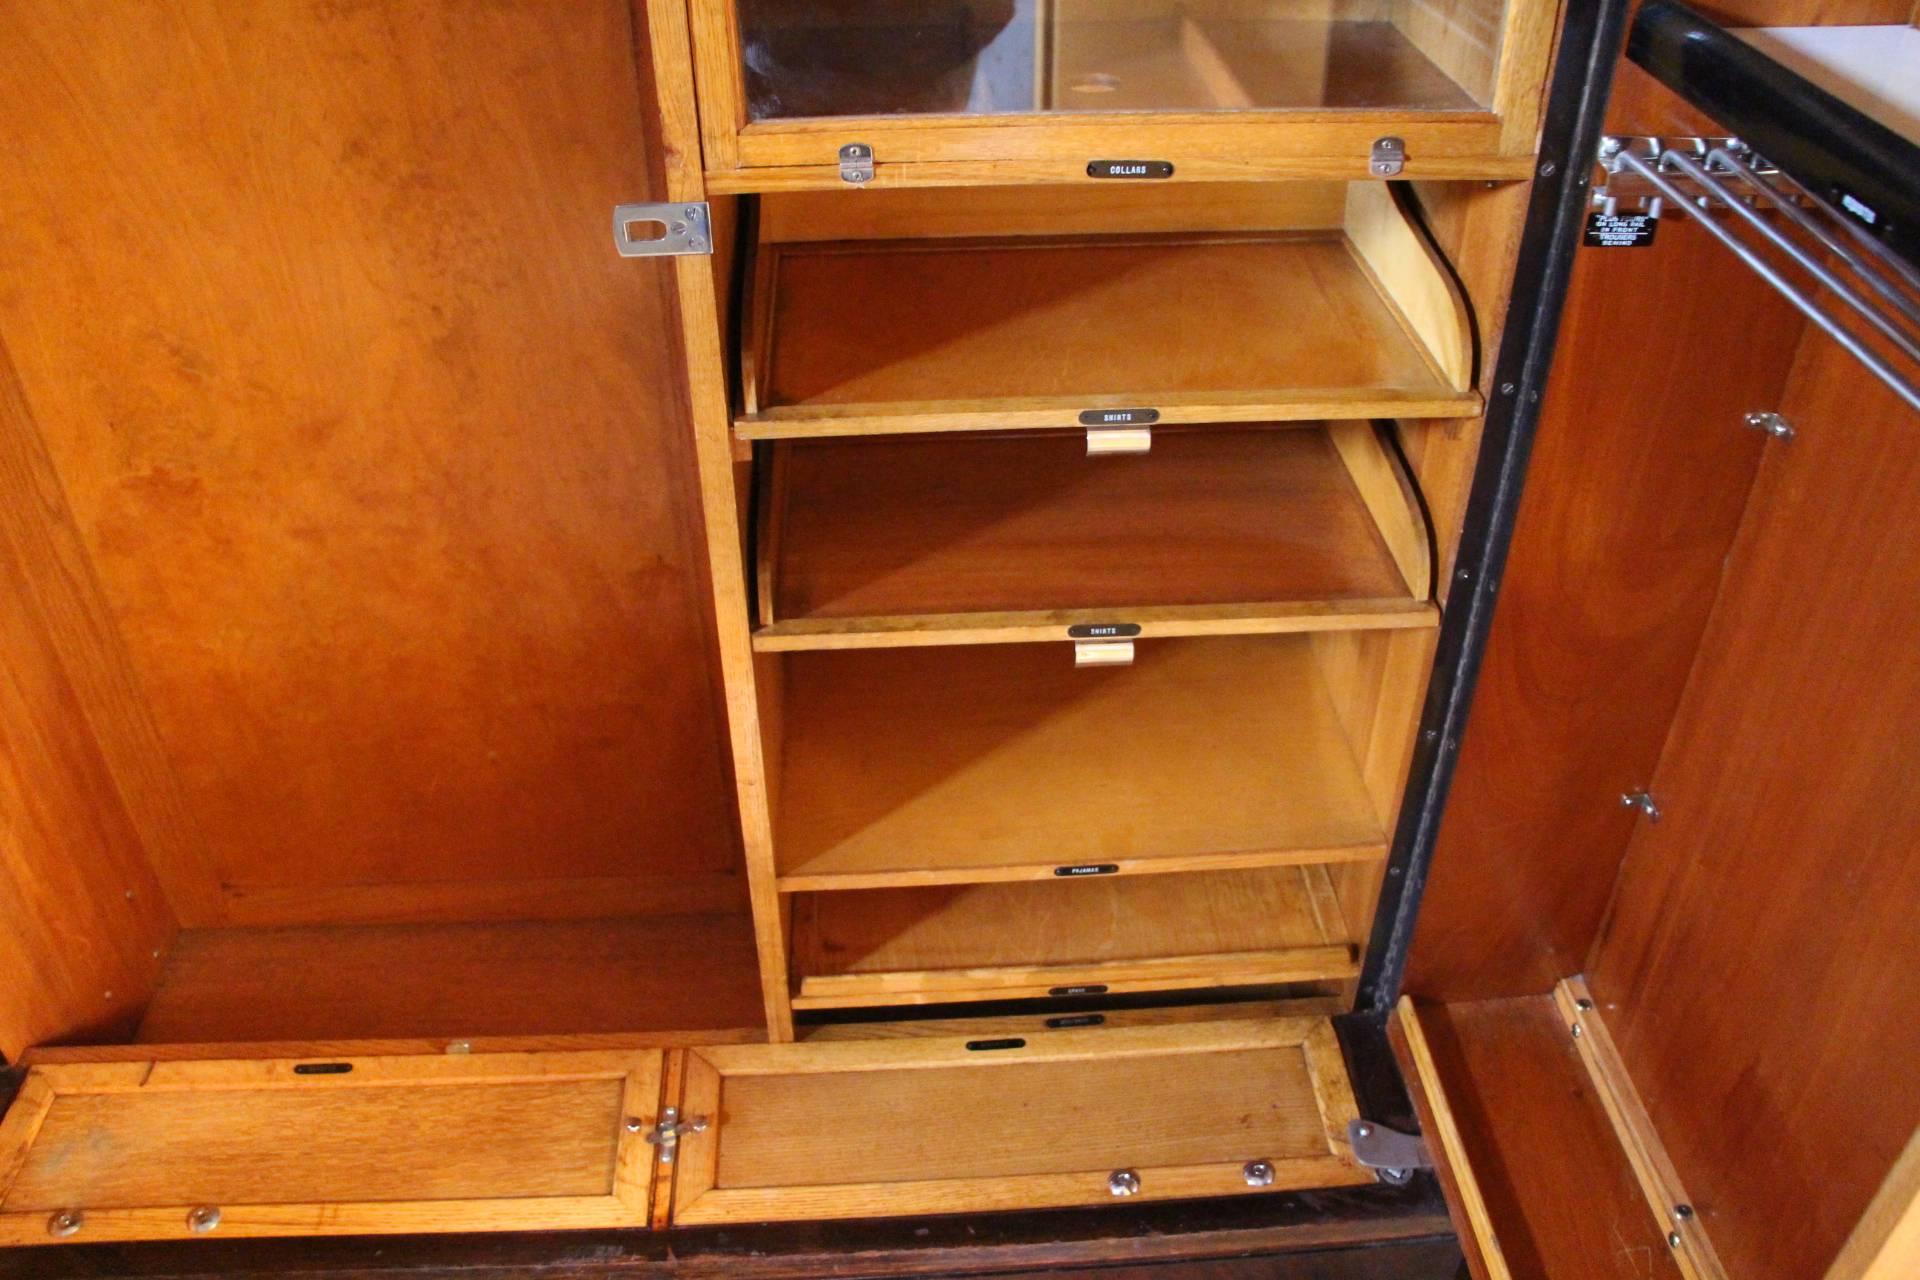 This closet is perfectly fitted inside. On the left hand side, it has got an articulated hanging section for 12 hangers and on the right hand side it has got a series of four glazed compartments, two sliding trays for shirts and two shelves.
Inside